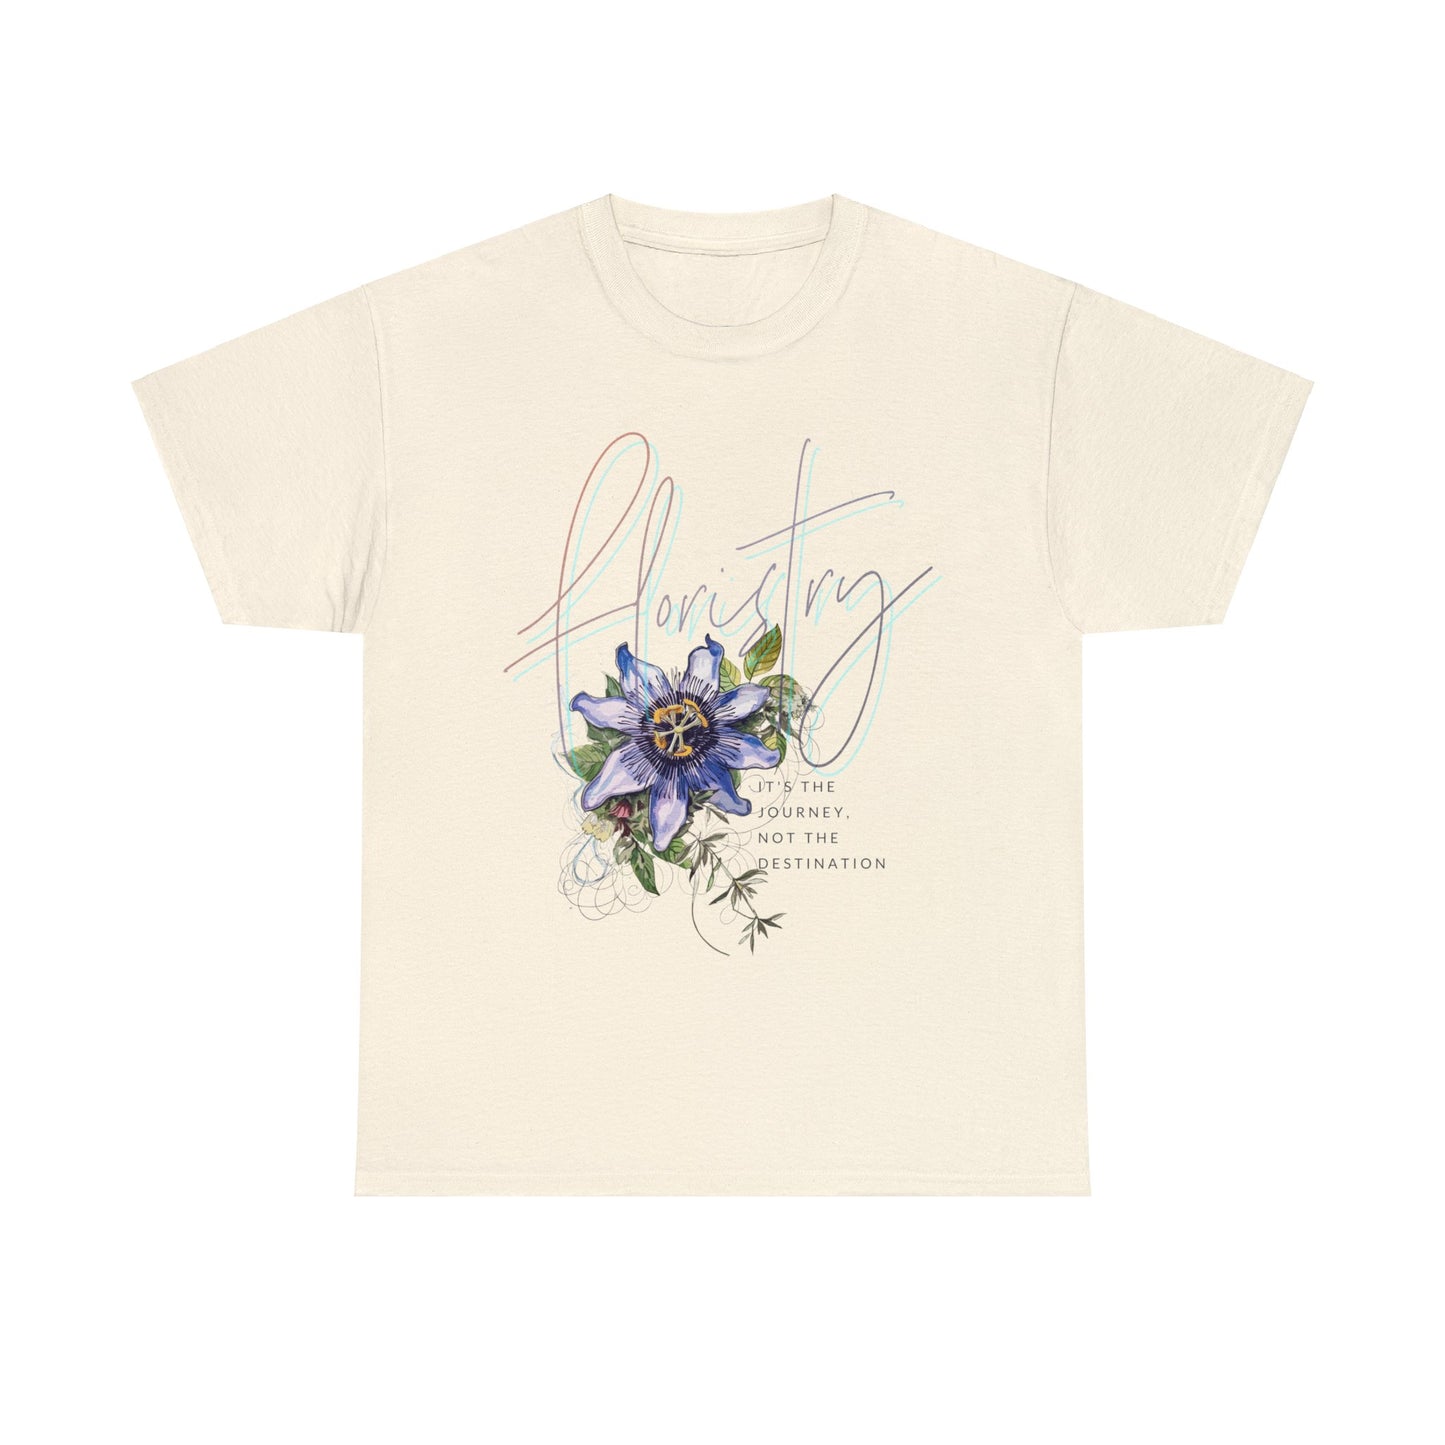 floristry, it's the journey not the destination. florist graphic tee - EXPRESS DELIVERY